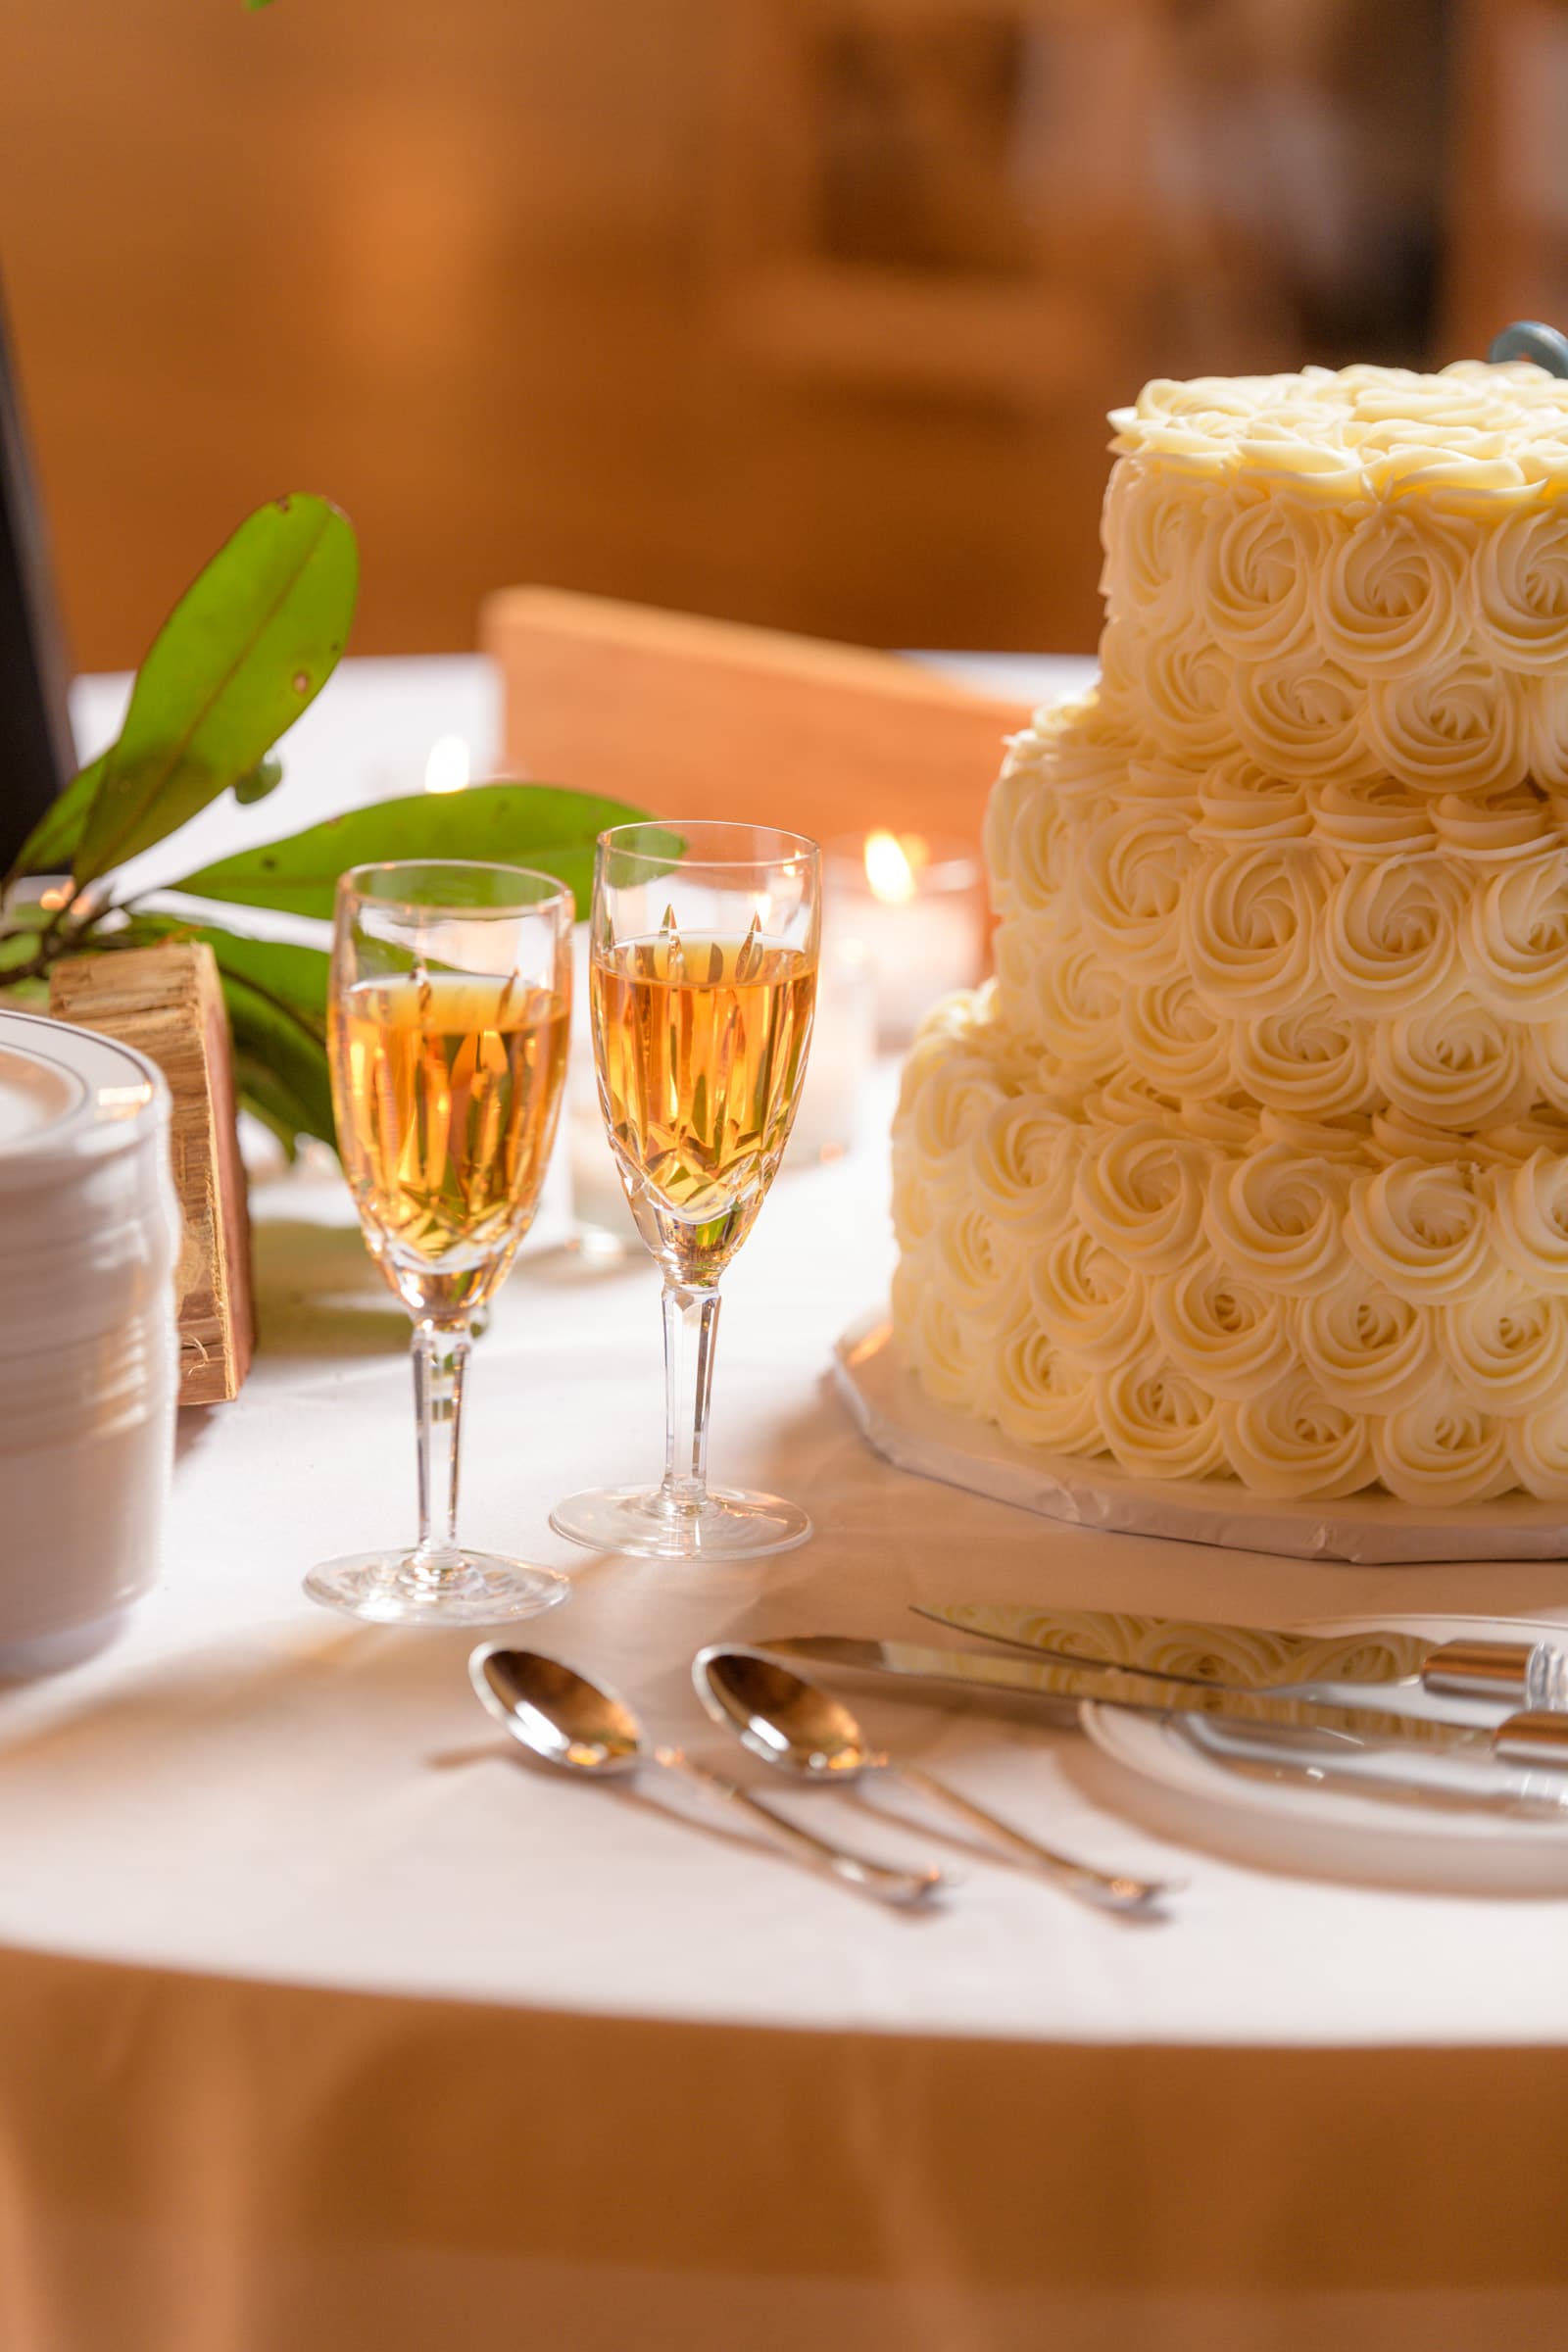 This exquisite photograph, captured by the expert team at Chris Spicks Photography, a distinguished Houston wedding photographer, features a beautifully composed still life from a wedding reception. The warm glow of the image highlights a table set for celebration, with two flutes of sparkling champagne sitting elegantly in the foreground. Their golden hues are rich and inviting, reflecting the joyous ambiance of the occasion.  Behind the champagne glasses, the wedding cake stands as a centerpiece, adorned with intricate swirls of creamy frosting that spiral delicately around its tiers. The craftsmanship of the cake's design is impeccable, displaying the kind of attention to detail that Chris Spicks Photography is known for capturing in their work.  The placement of the objects, from the silverware to the glasses and the natural greenery accent beside the cake, is meticulous, creating a picturesque tableau that beckons guests to partake in the festivities. The soft, natural lighting enhances the textures and colors, imbuing the scene with a sense of warmth and intimacy.  As a Houston wedding photographer, Chris Spicks Photography has a keen eye for such details, expertly preserving the beauty and elegance of every aspect of a wedding day. This photograph not only captures the luxurious elements of the celebration but also the ambiance of sophistication and love that surrounds the couple's special day in Houston.